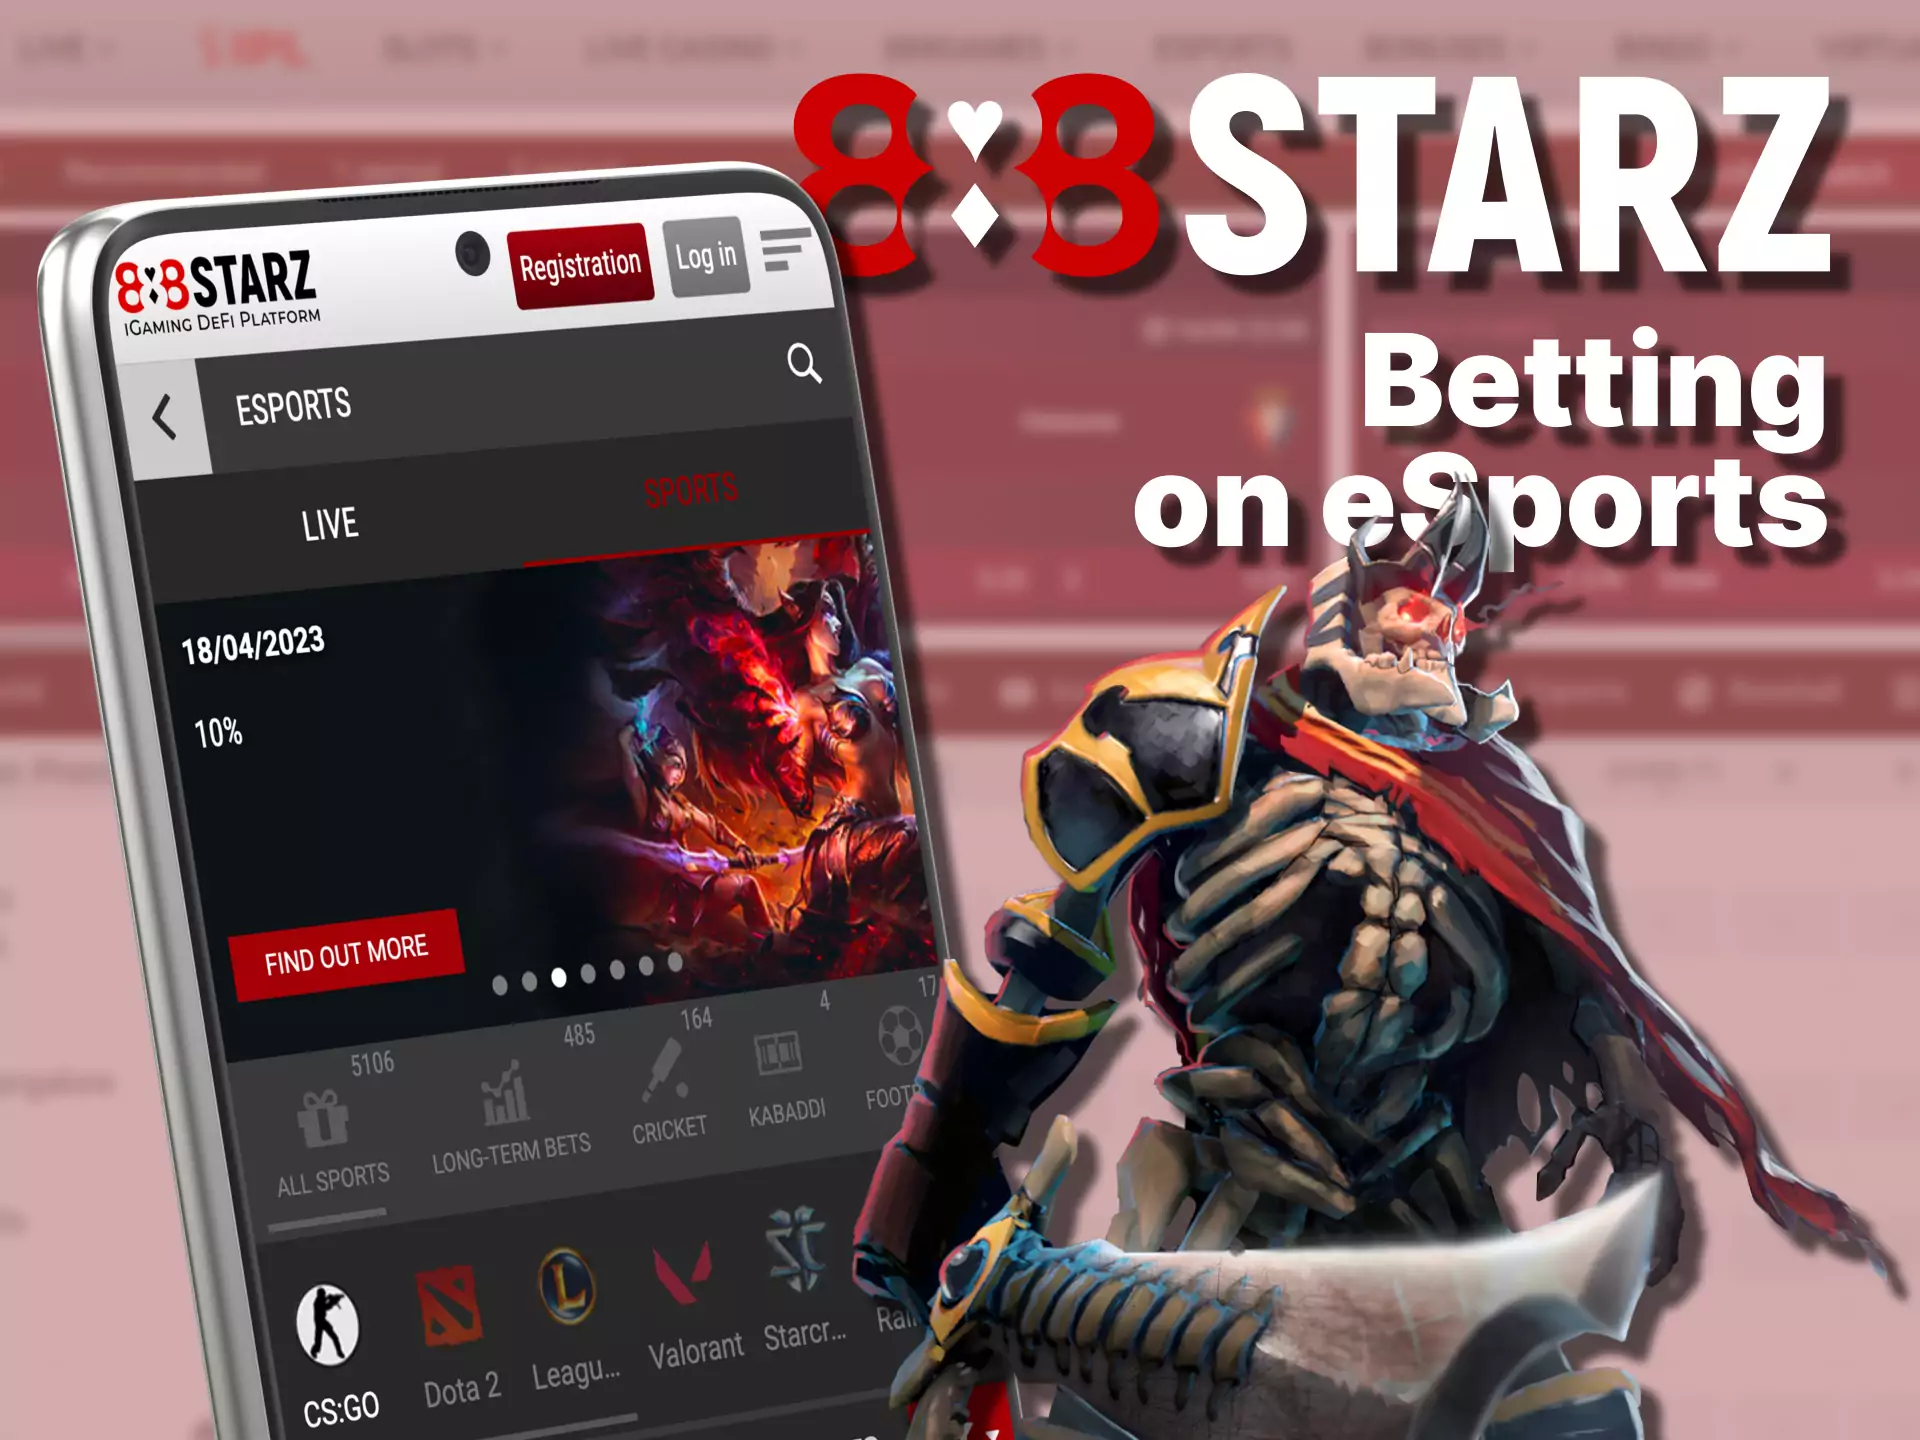 If you're an esports fan, bet on your favorite team in the 888starz app.